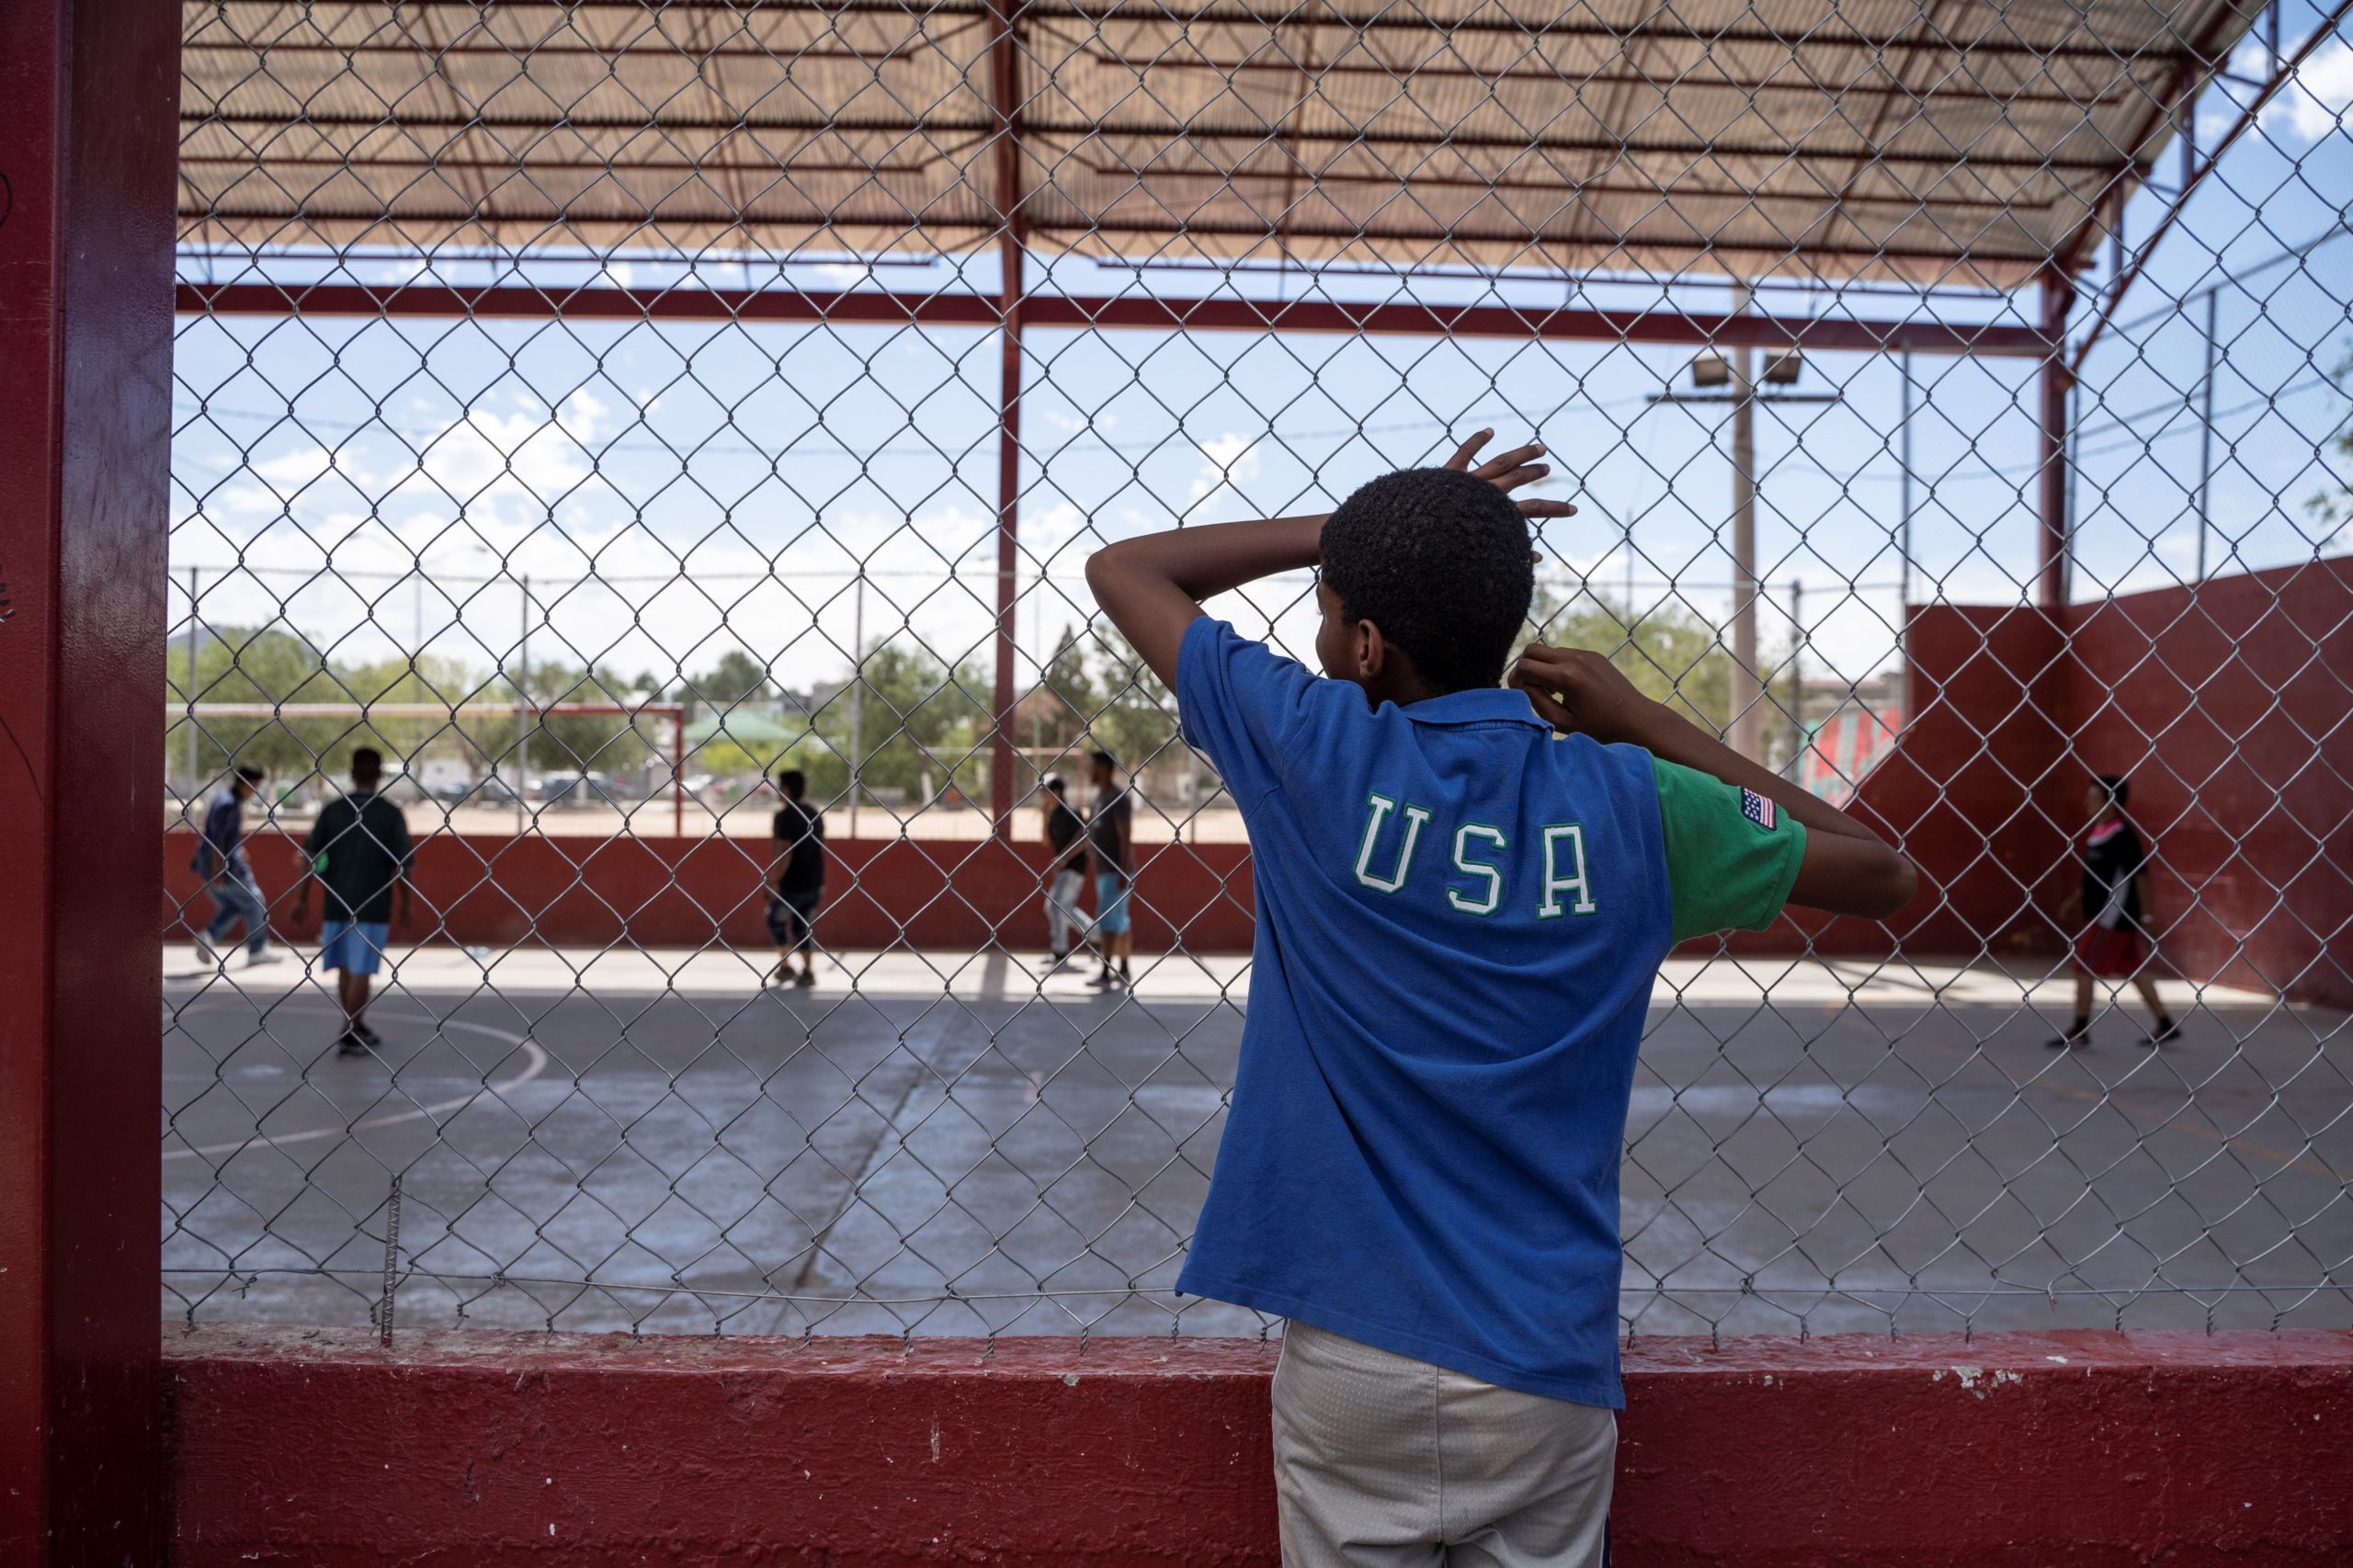 One of the residents of Iglesia Metodista "El Buen Pastor" migrant shelter watches the soccer match at a park near the shelter on June 09, 2019. (PAUL RATJE/AFP via Getty Images)